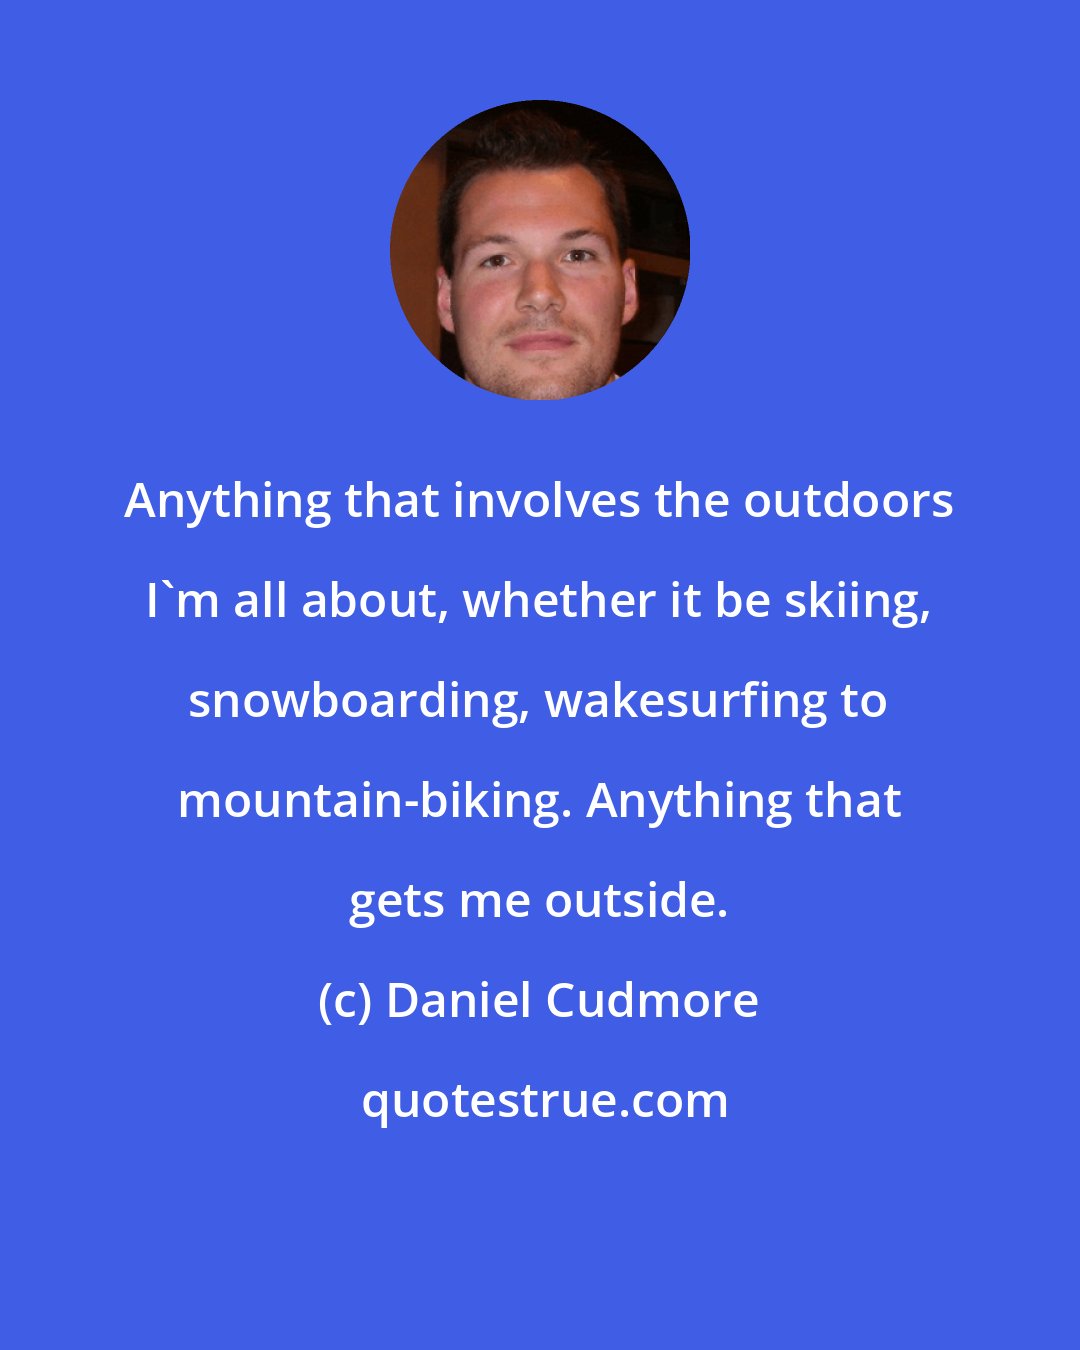 Daniel Cudmore: Anything that involves the outdoors I'm all about, whether it be skiing, snowboarding, wakesurfing to mountain-biking. Anything that gets me outside.